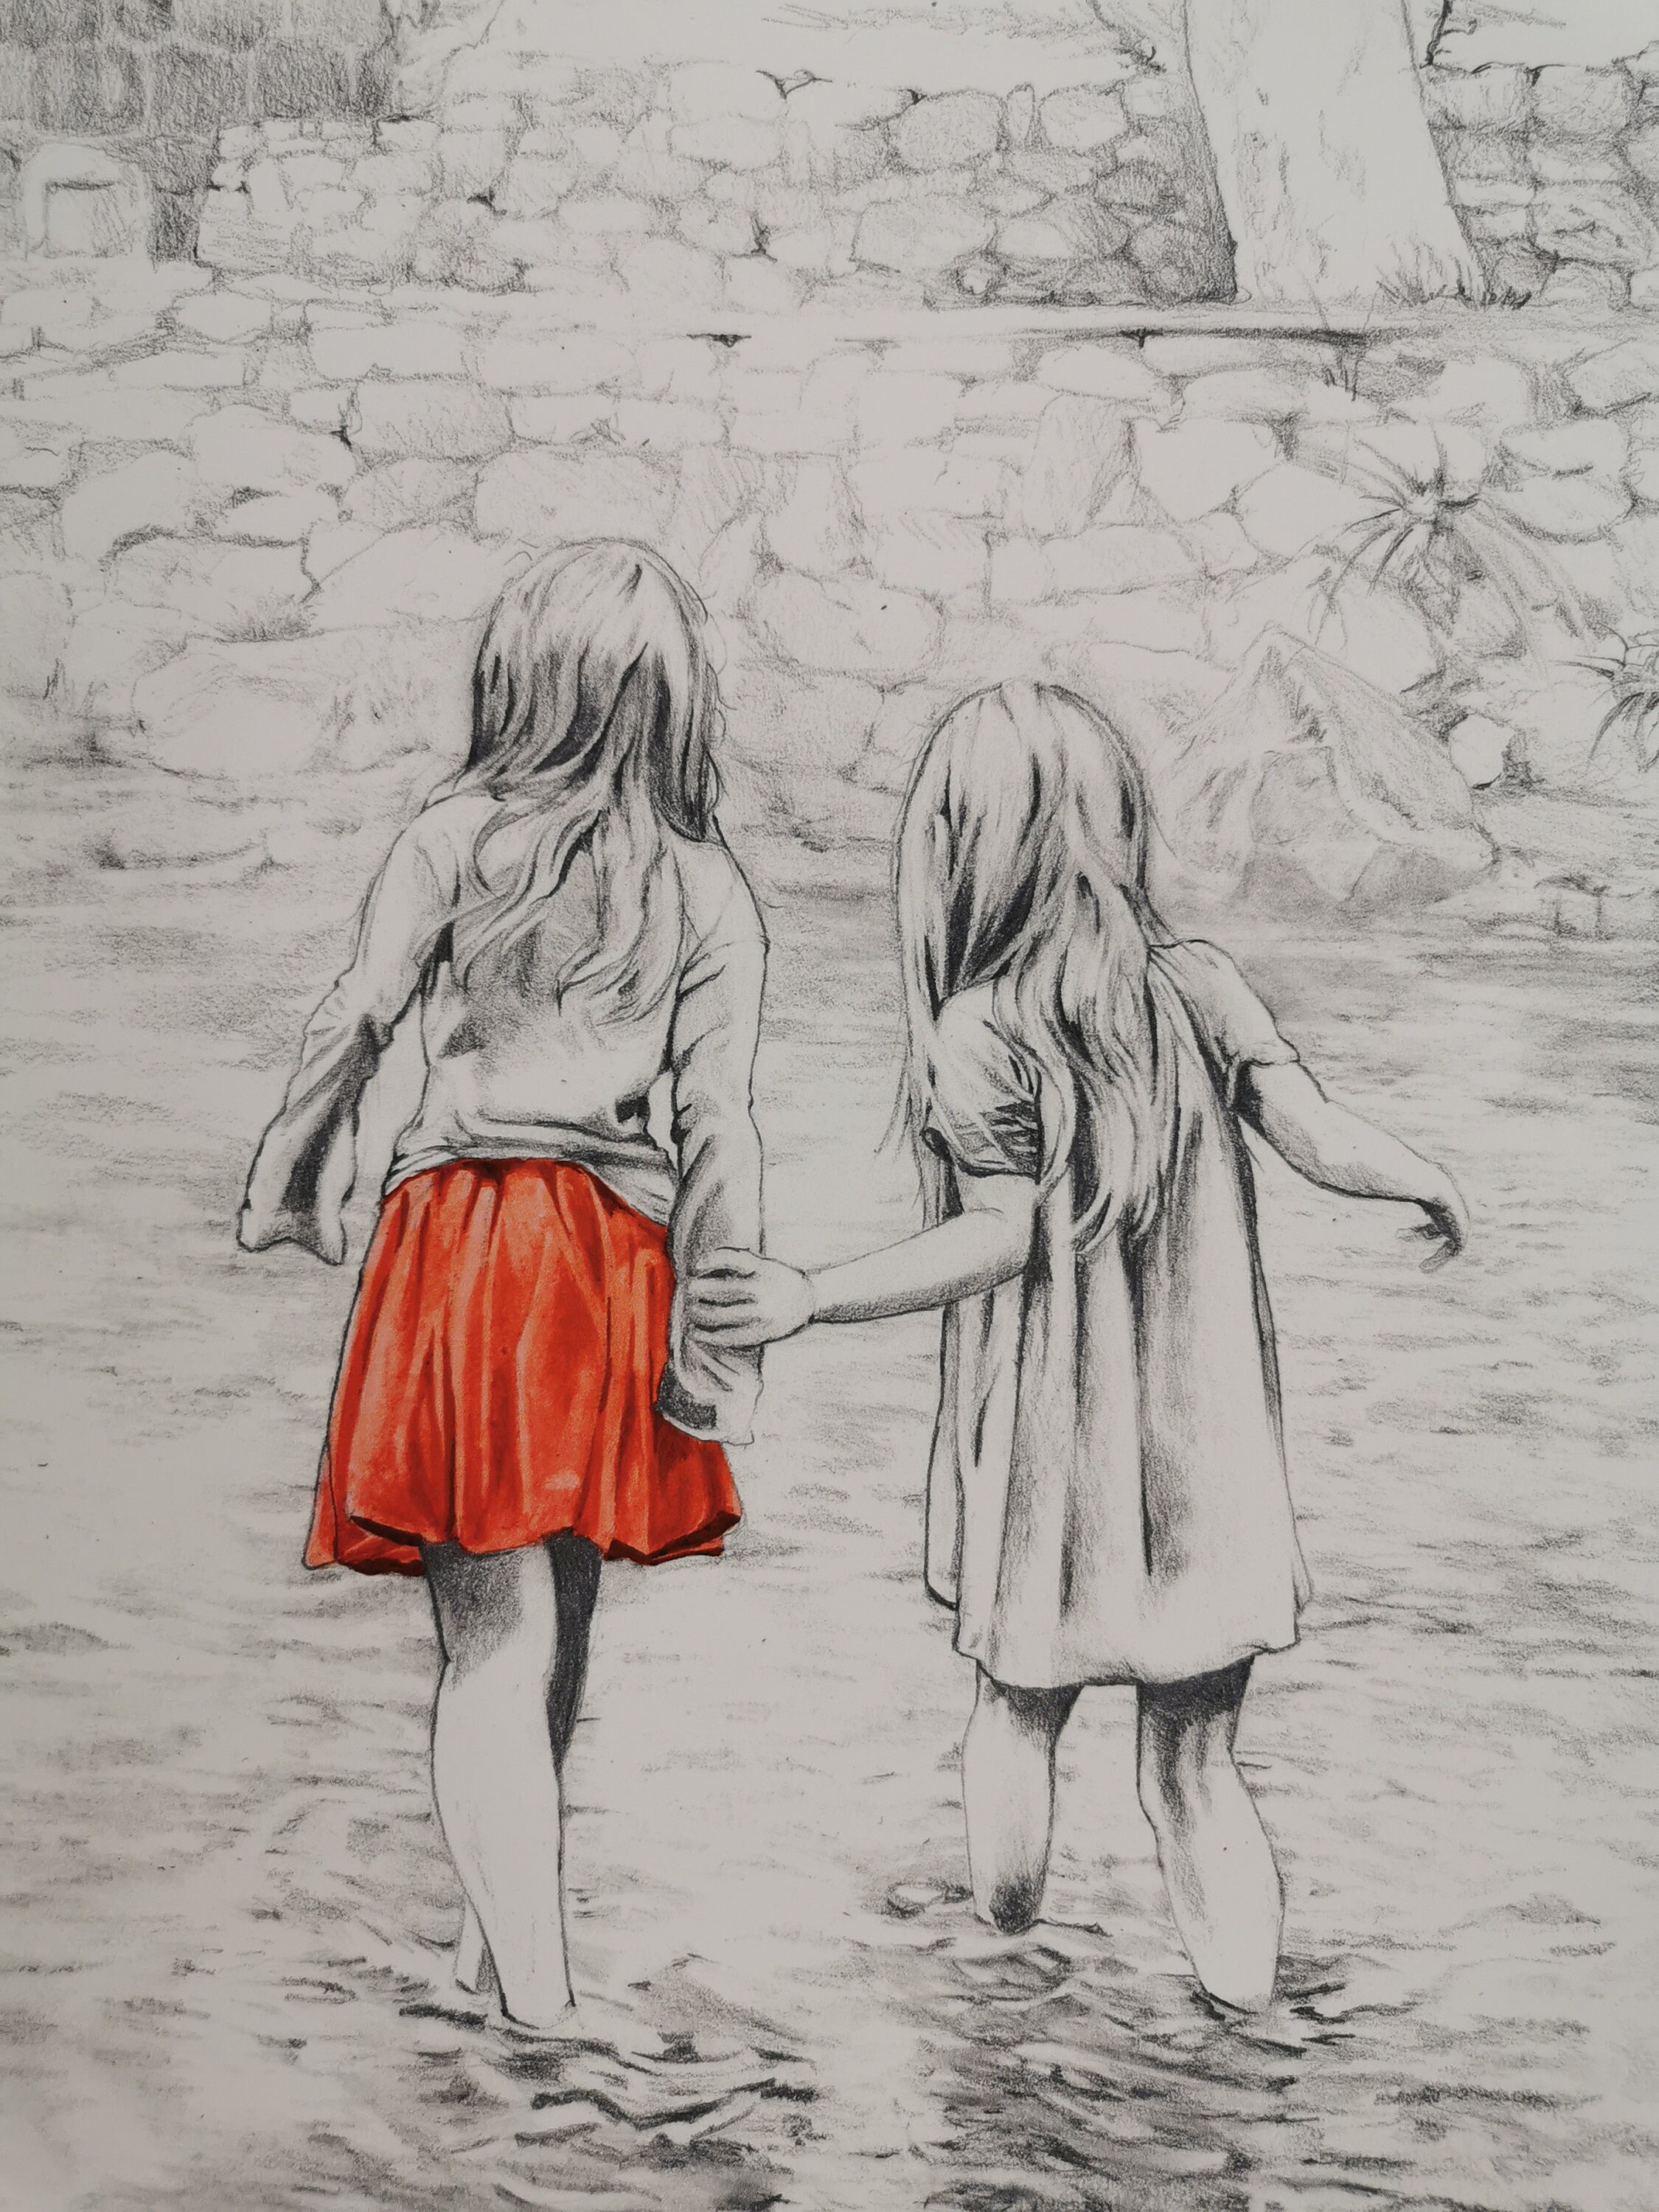 How to draw brother and sister with umbrella scenery  Brother  sister  pencil sketche  video Dailymotion